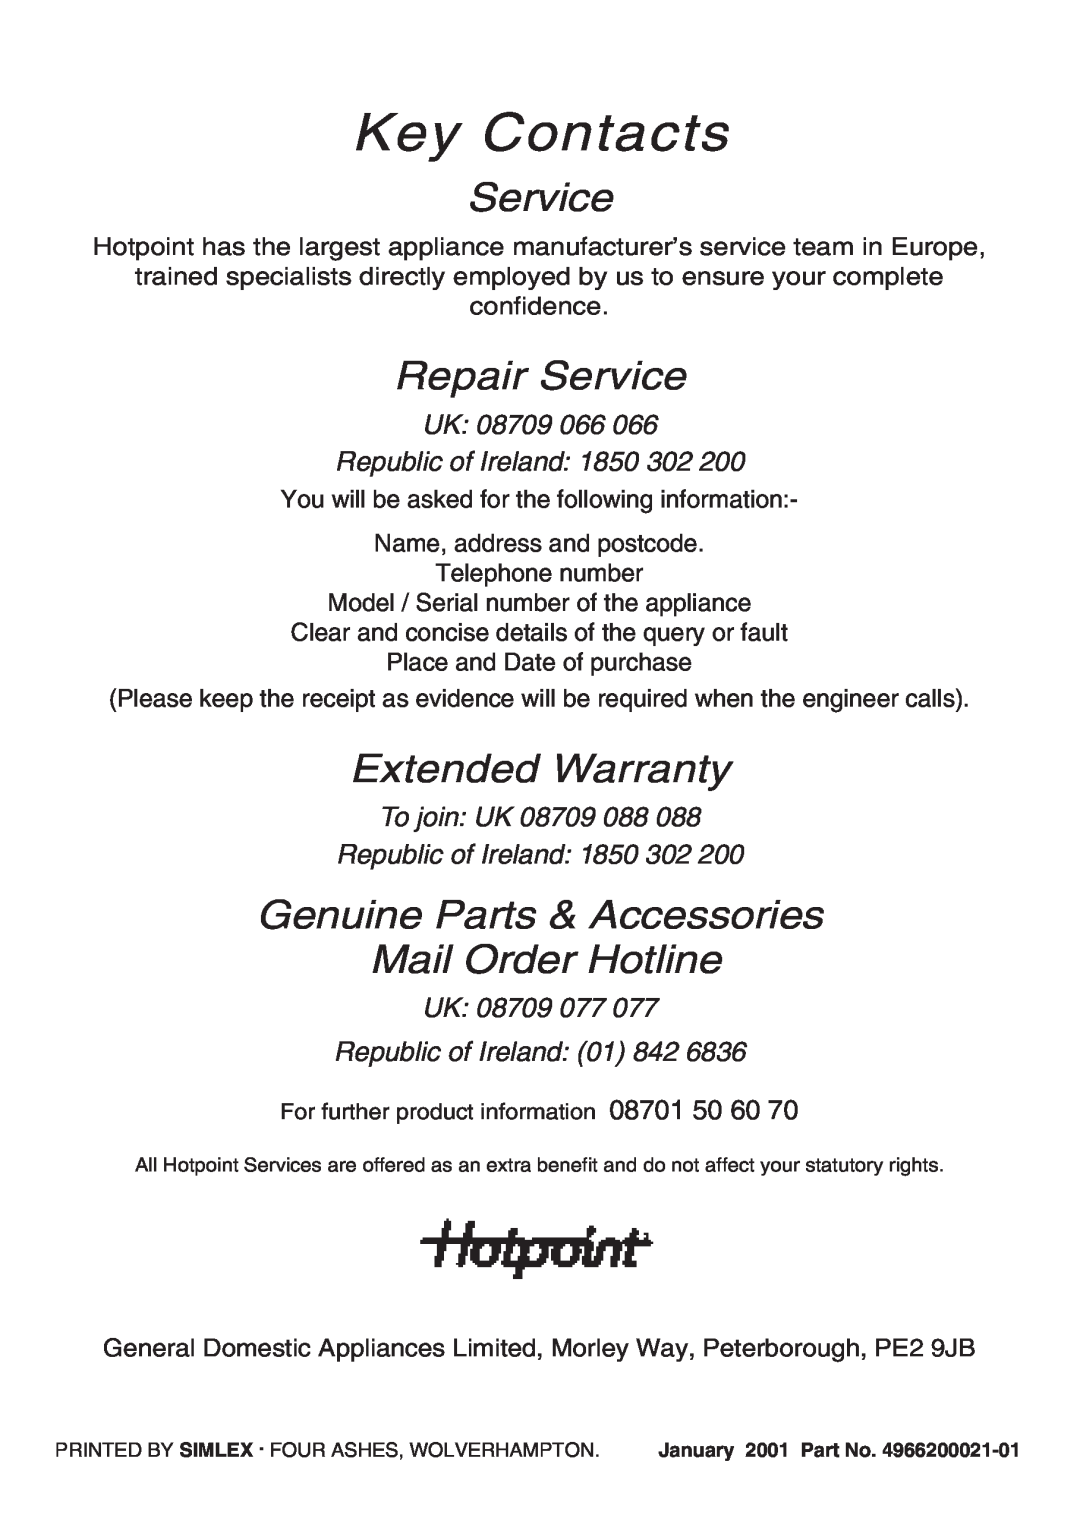 Hotpoint EW41 manual Key Contacts, Repair Service, Extended Warranty, Genuine Parts & Accessories Mail Order Hotline 